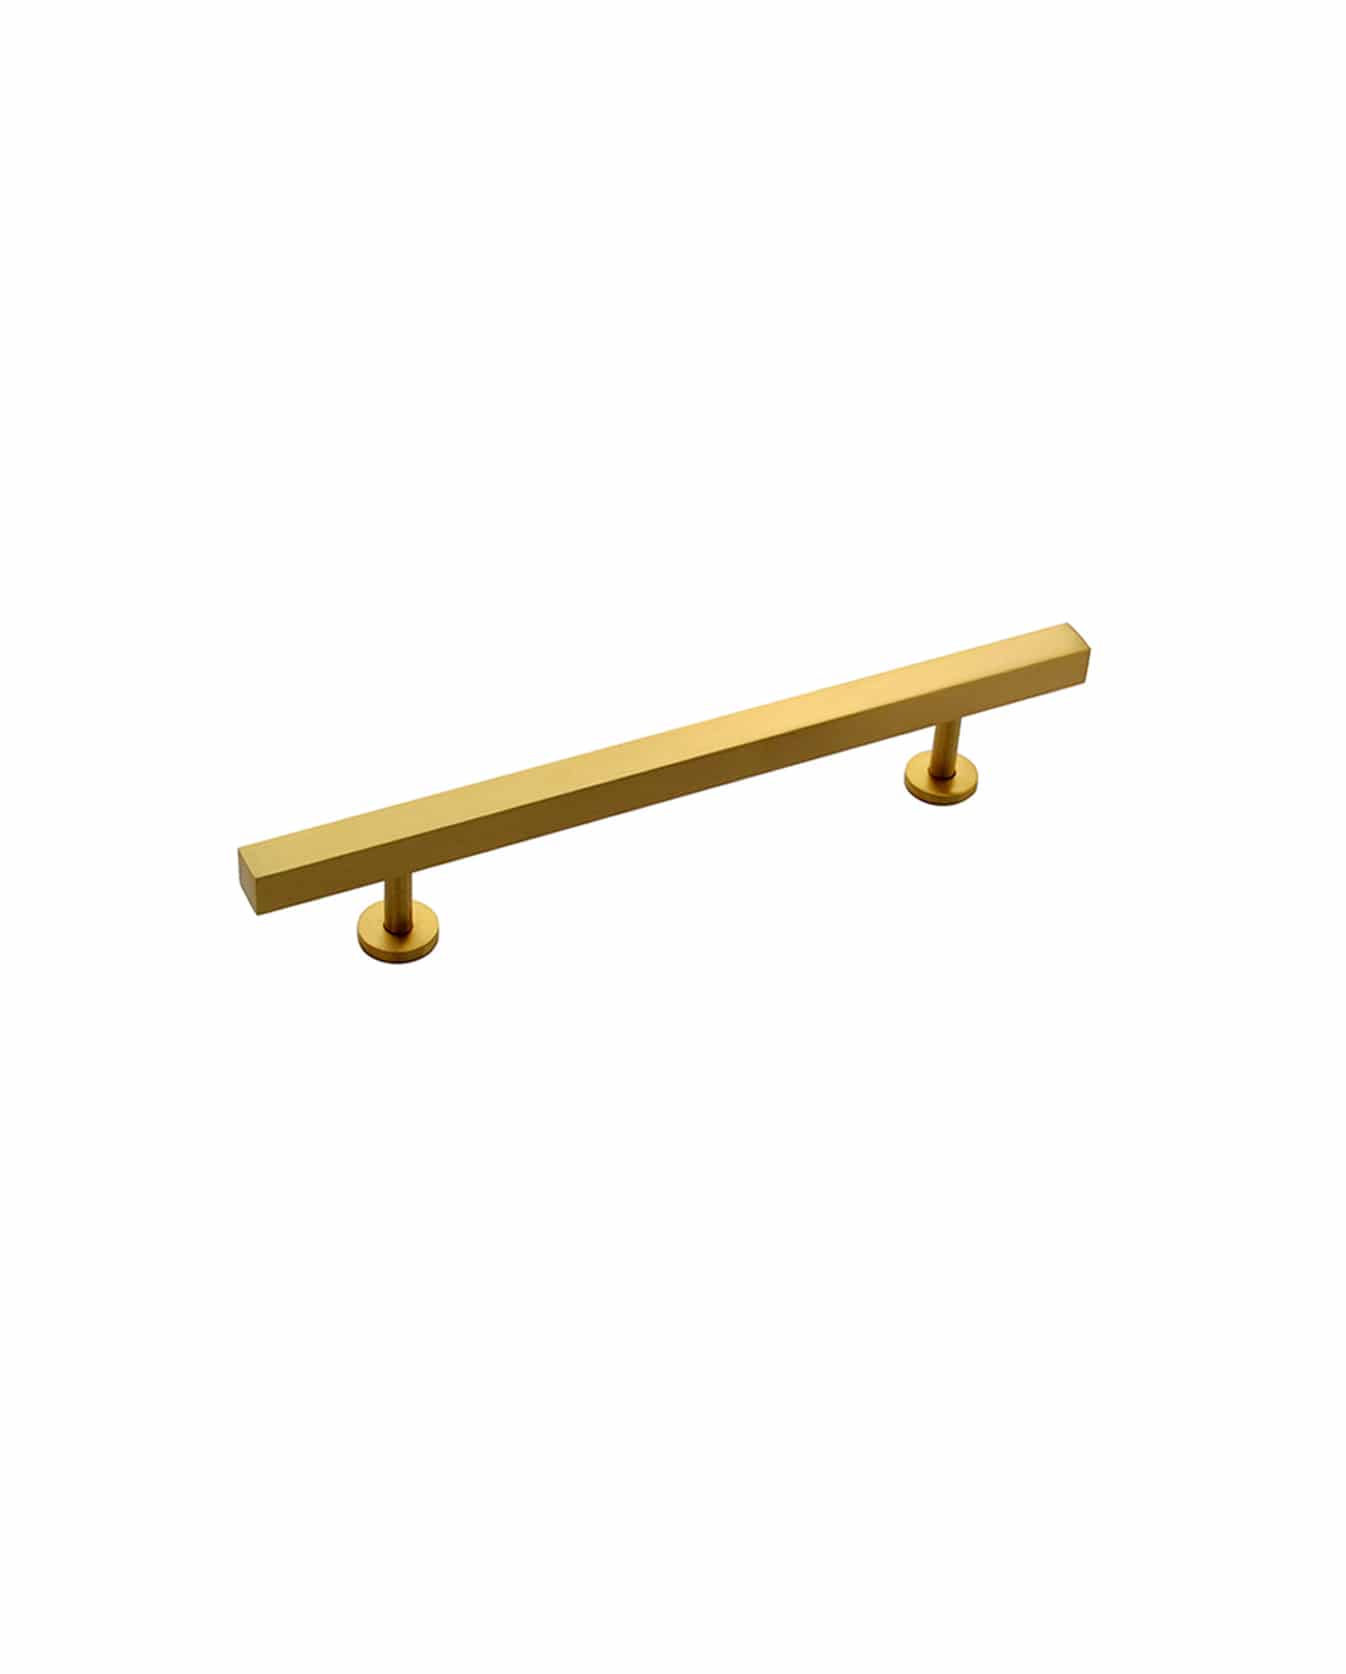 Cabinet Pull Square Bar,square bar handle pull for kitchen,12 inch pull handles for kitchen,brushed brass drawer pull handle,polished nickel drawer pull handle,satin nickel drawer pull handle,brass pull handle for kitchen cabinet,Brass pull,12 inch pull,Hand crafted pull,round shape pull,pull for kitchens,pull for doors,pull for drawers,pull for Vanity,pull for Dressers,Brushed Brass pull,cabinet pulls 12 inch,Modern design pulls,Gold bar pulls,12 inches pulls,square handle 12,square cabinet pulls,Kitchen hardware,Satin brass pulls,dresser pull handle,Cabinet handles,brass handles pull,vanity handles pull,Kitchen handles